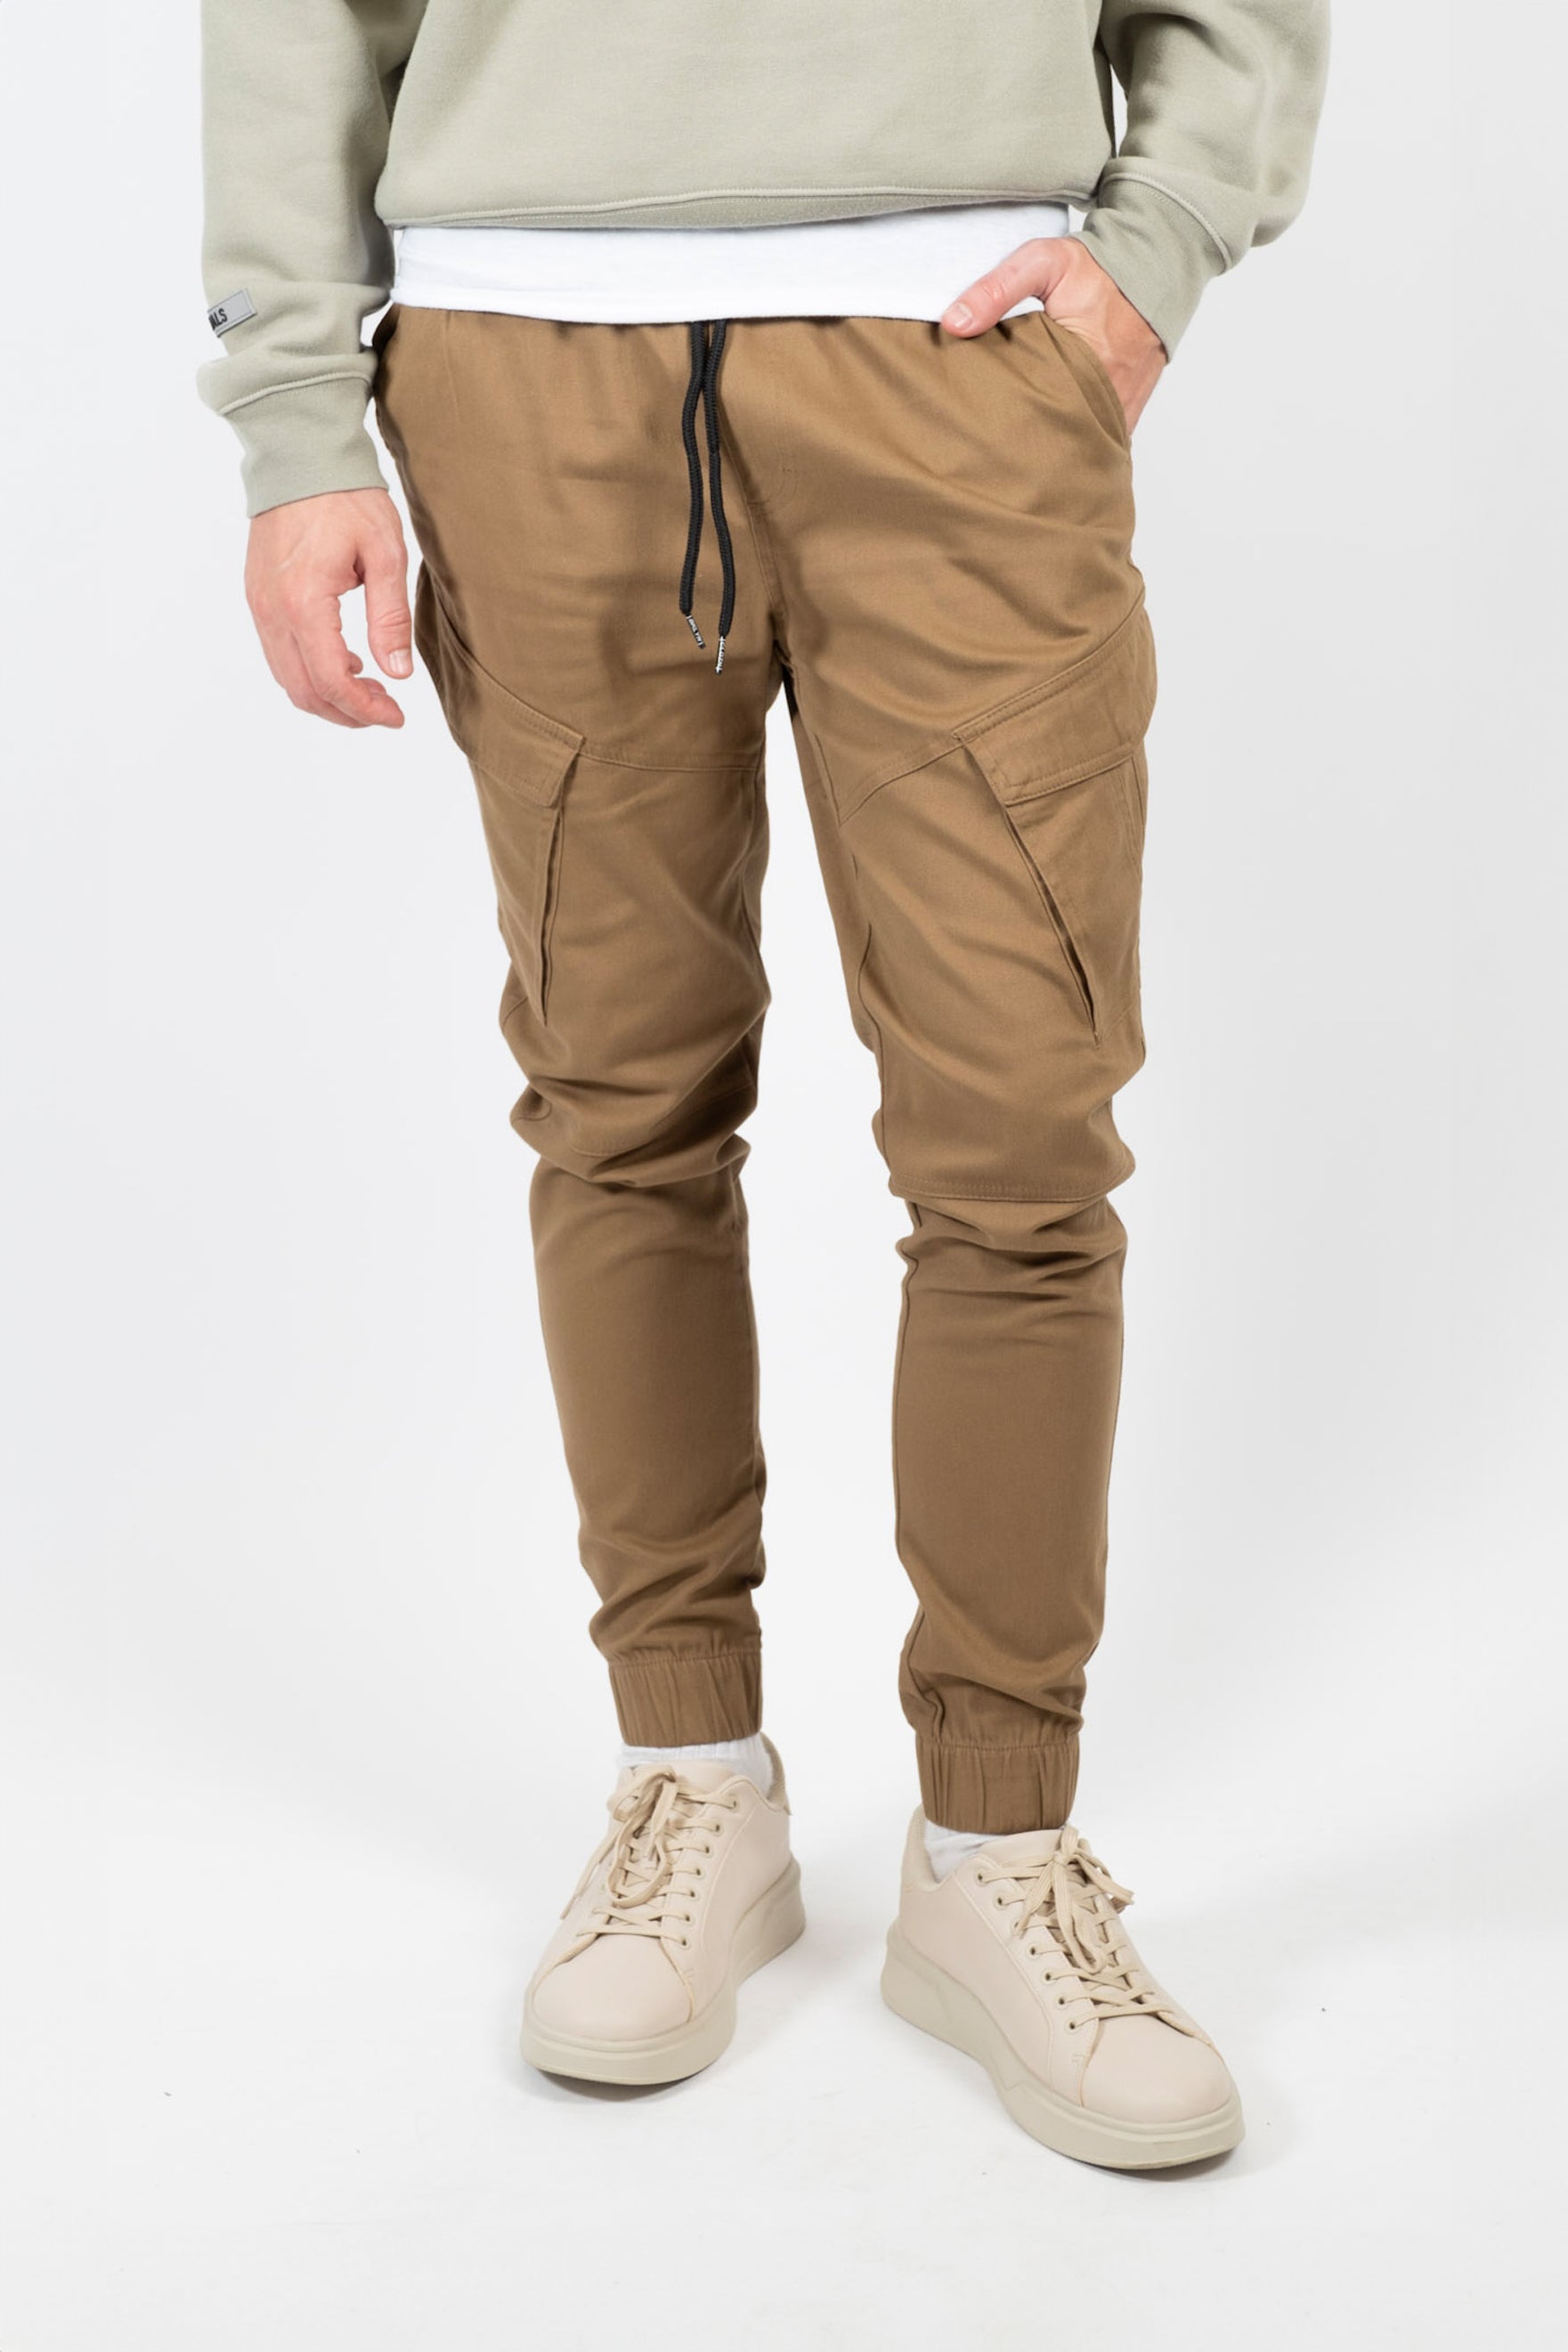 Buy Slanted Cargo Pocket Stretch Twill Jogger Men's Jeans & Pants from  Buyers Picks. Find Buyers Picks fashion & more at